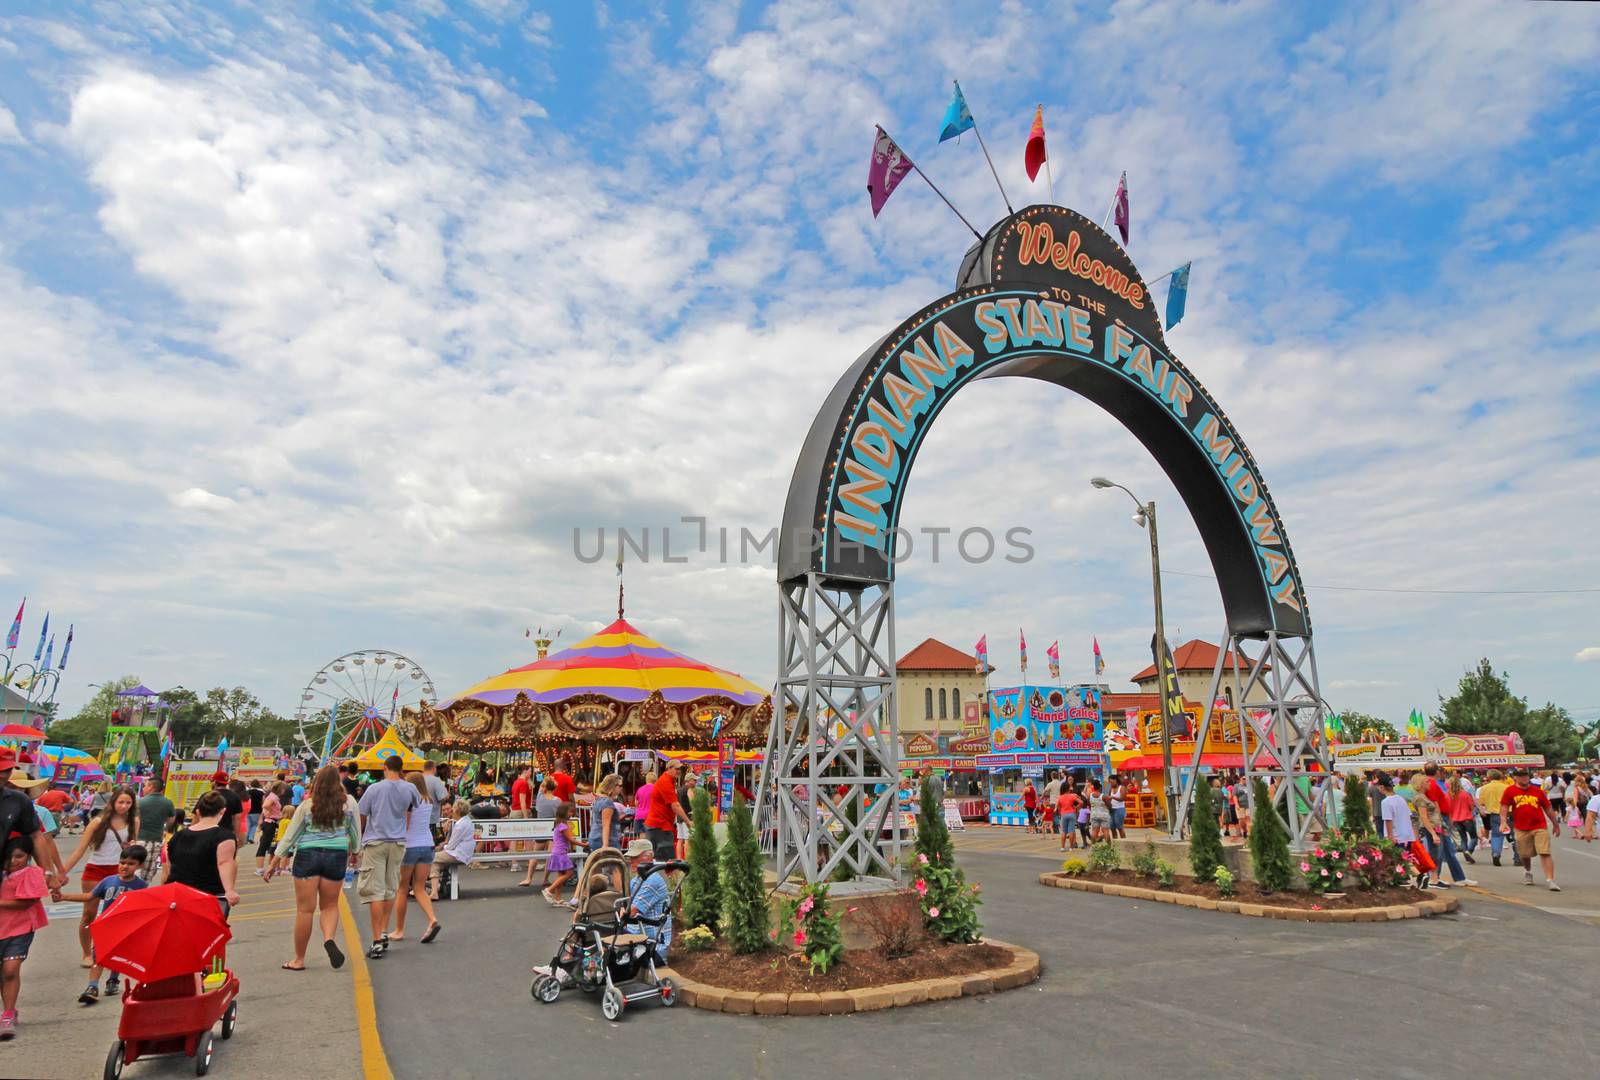 Entrance to the Midway at the Indiana State Fair by sgoodwin4813